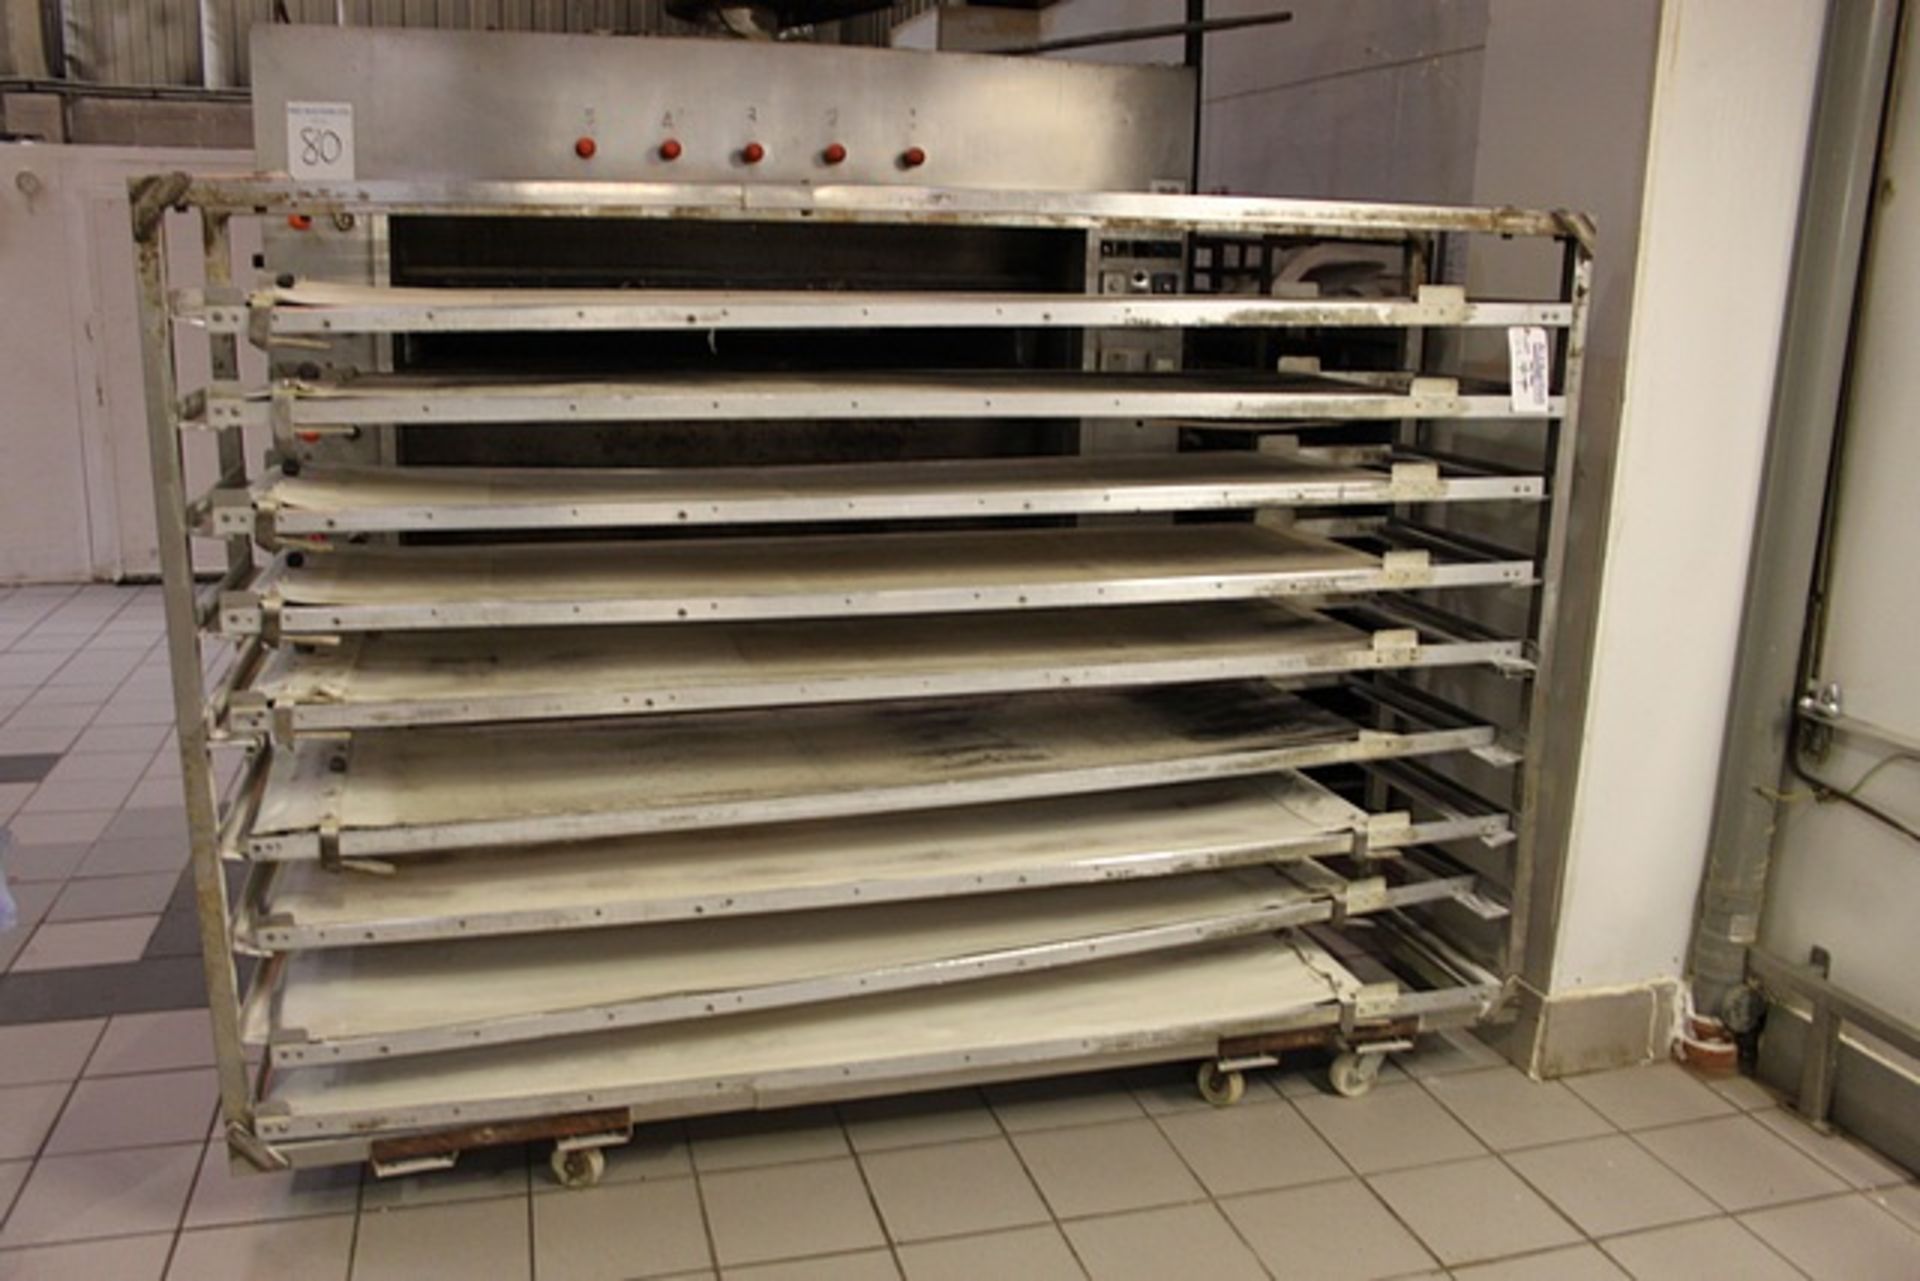 9 x manual belted sheeting tables each 2400mm x 580mm complete with stainless steel mobile rack to